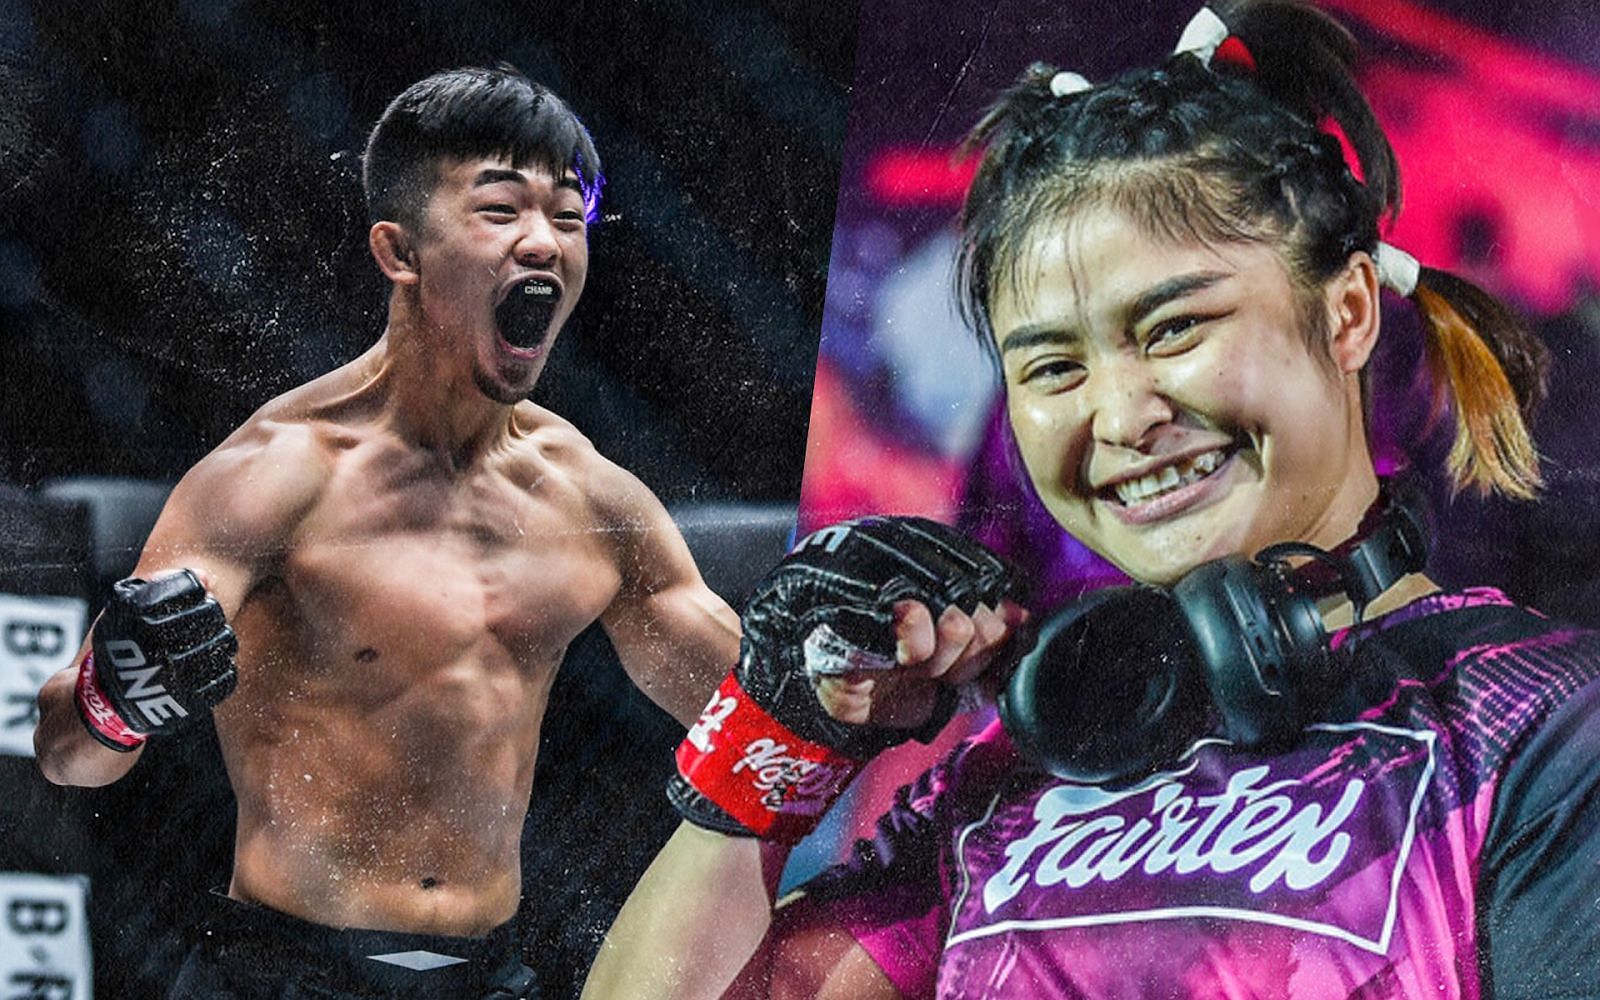 Christian Lee comments on Stamp Fairtex’s progression as an MMA fighter